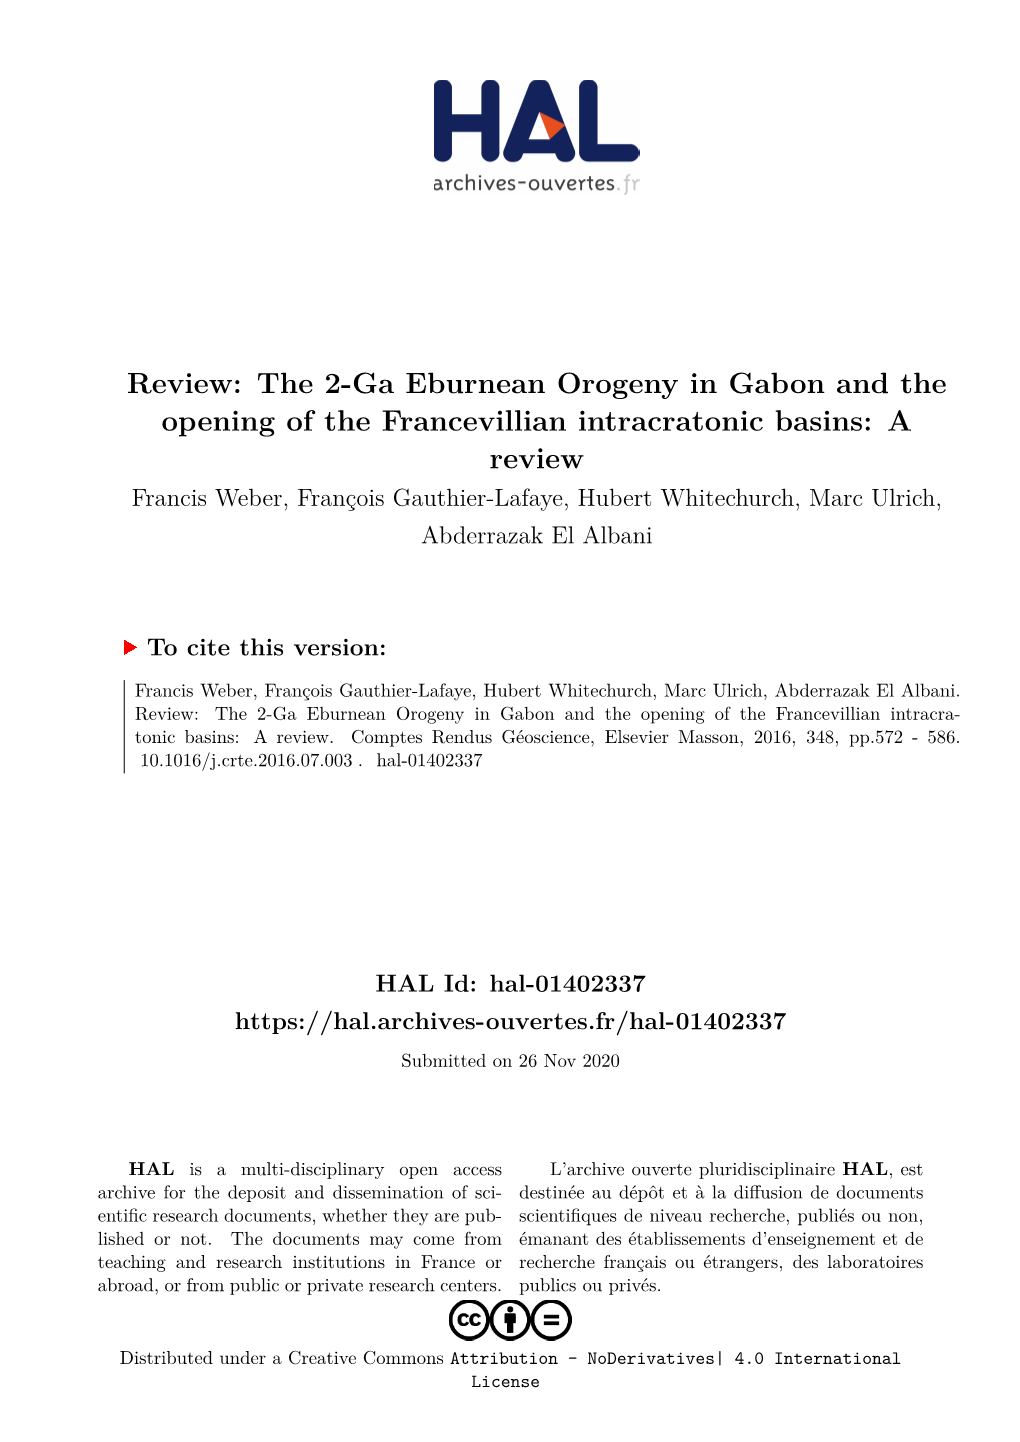 Review: the 2-Ga Eburnean Orogeny in Gabon and the Opening of The